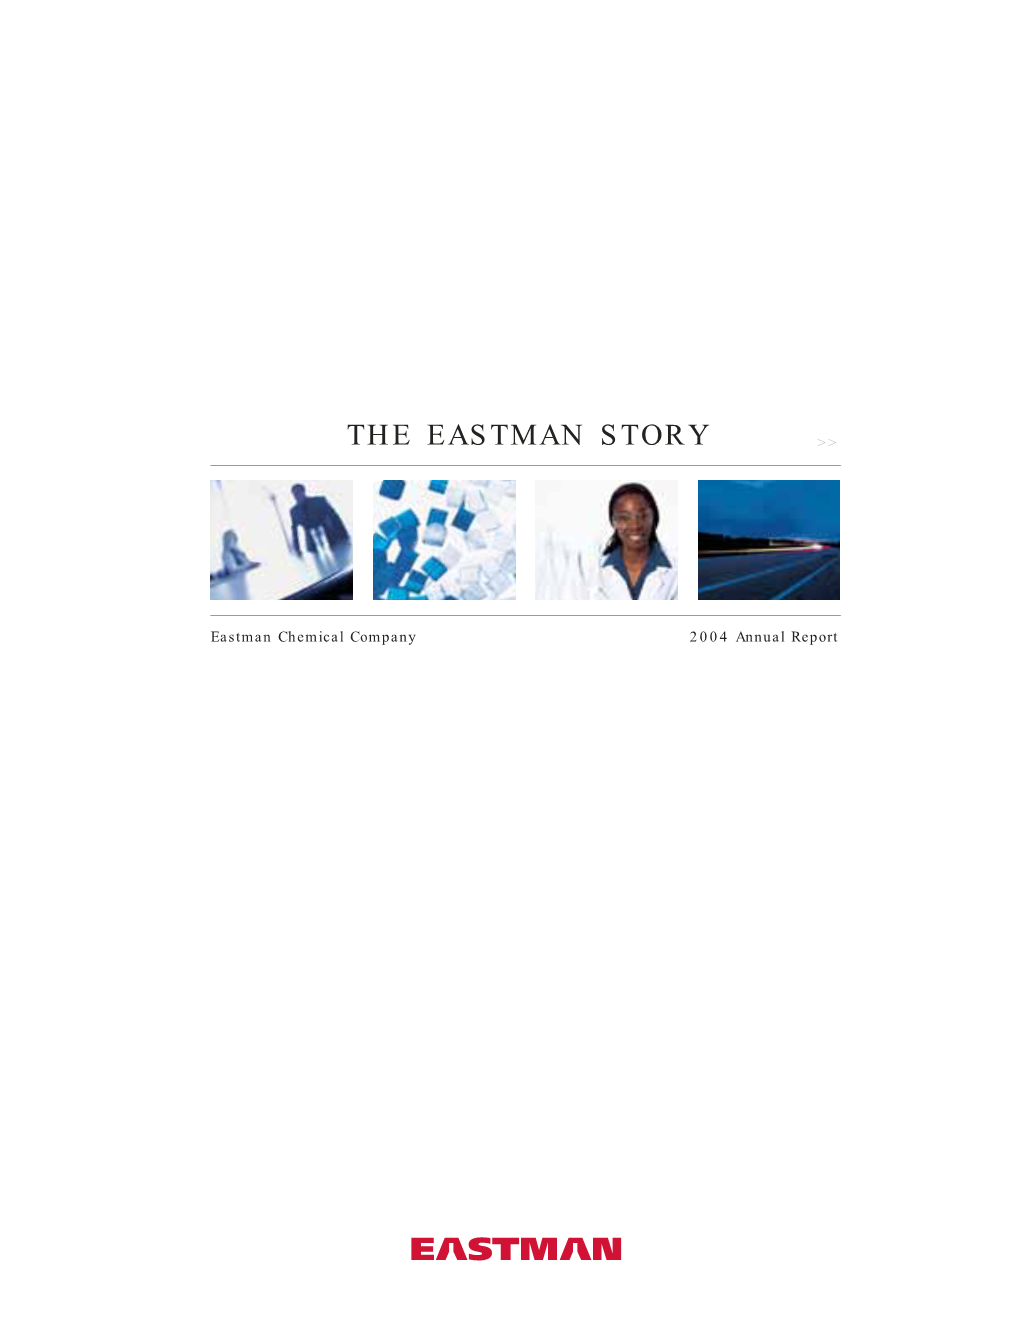 The Eastman Story >>